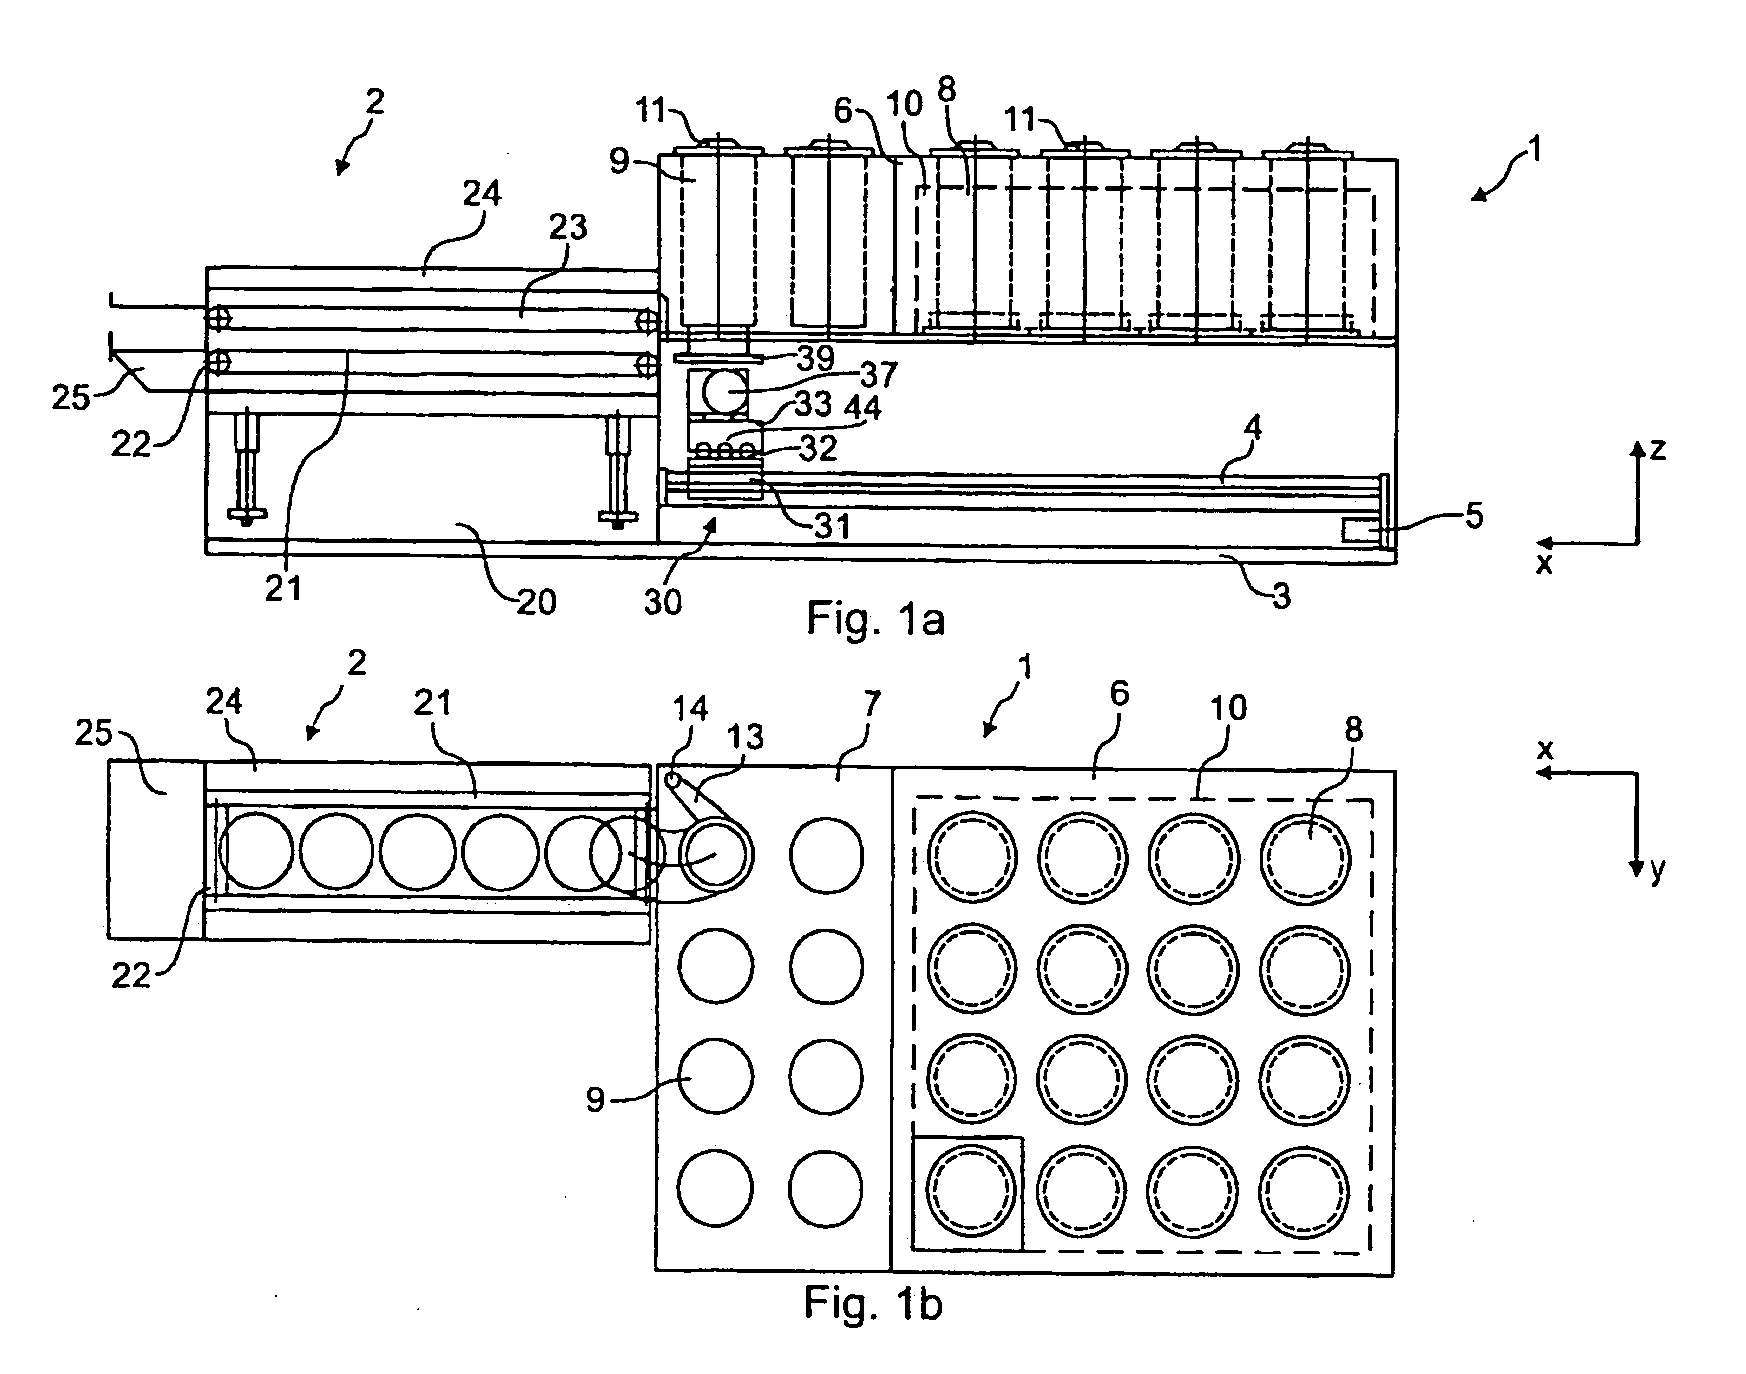 Apparatus and process for producing a dough product topped with assorted toppings and a dough product